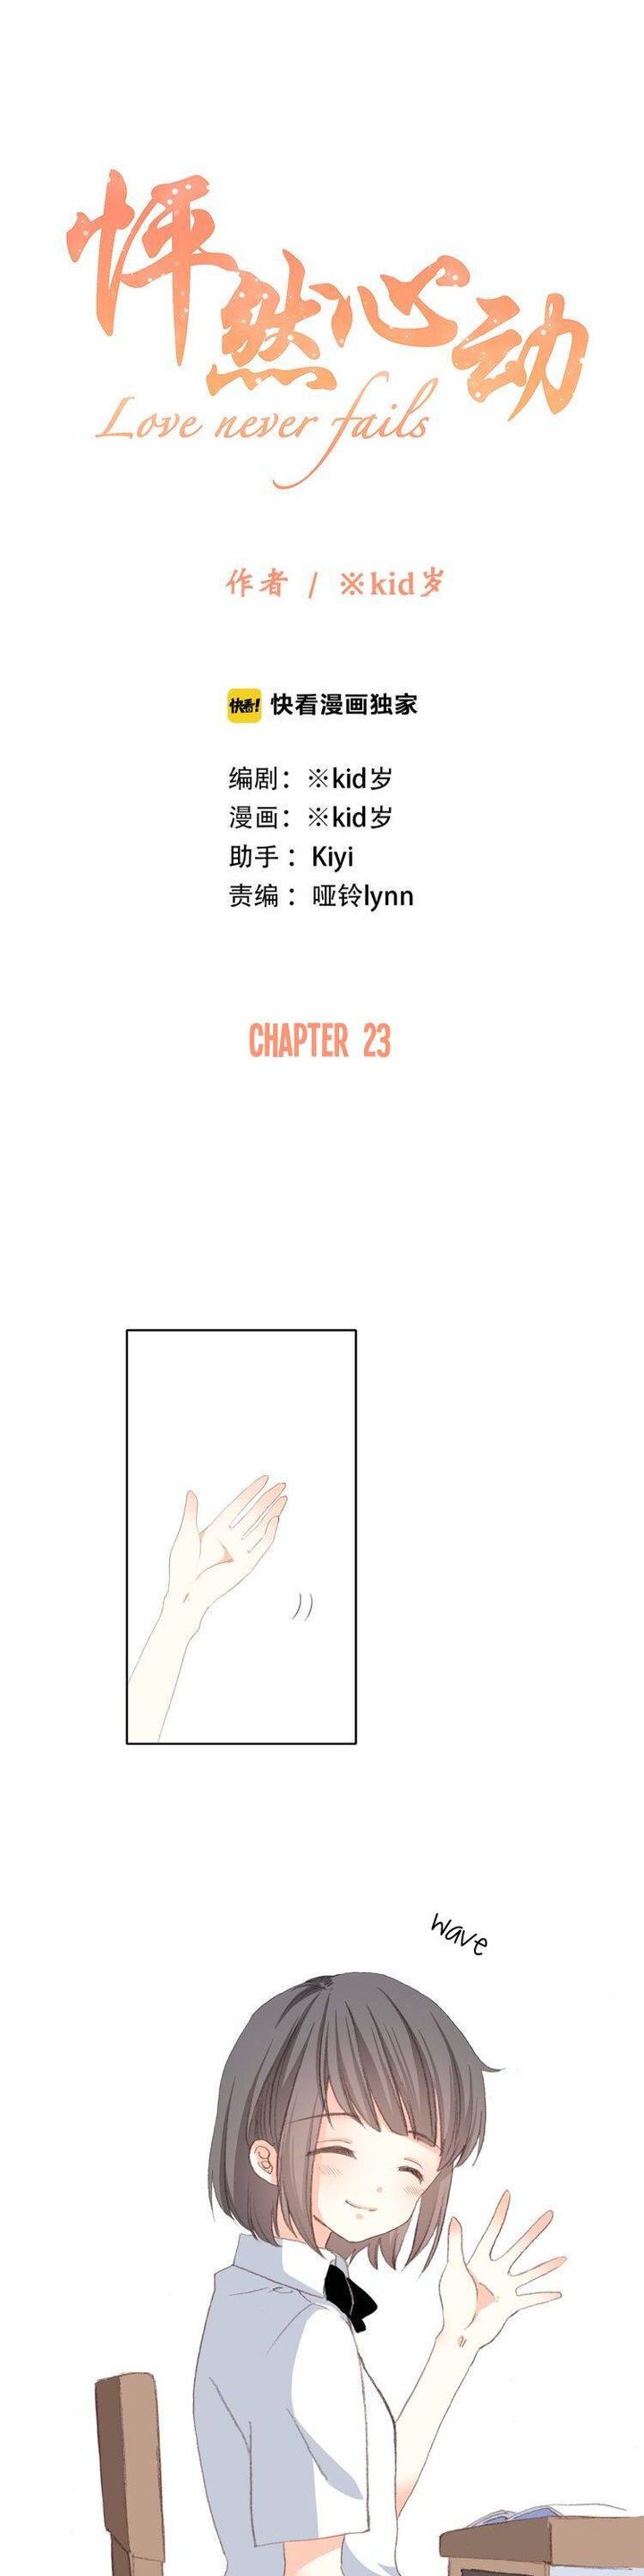 Love Never Fails Chapter 23 Page 1